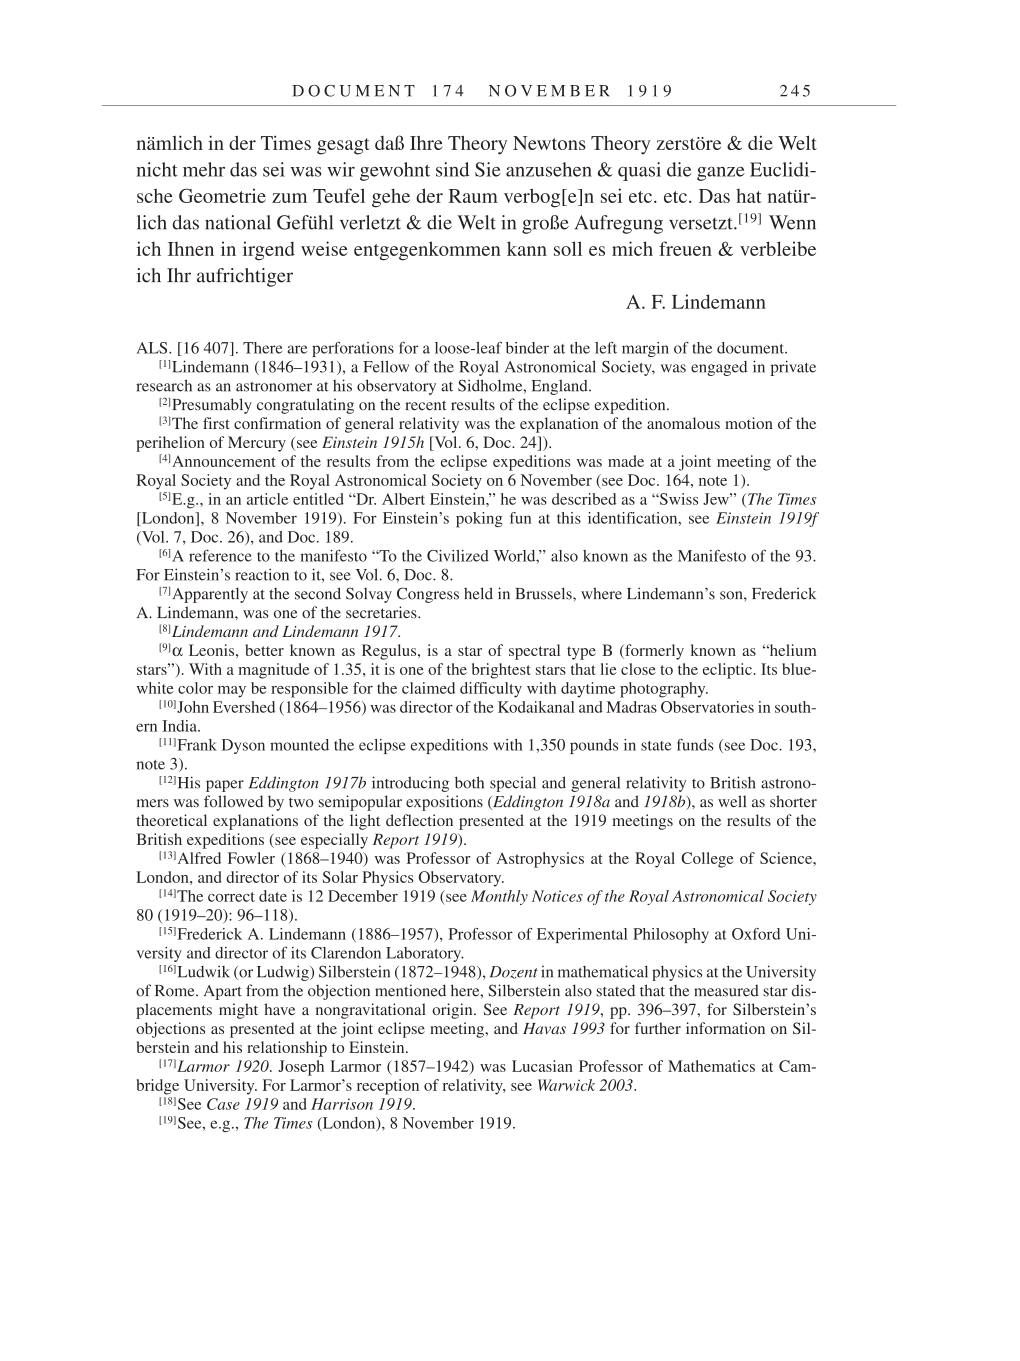 Volume 9: The Berlin Years: Correspondence January 1919-April 1920 page 245